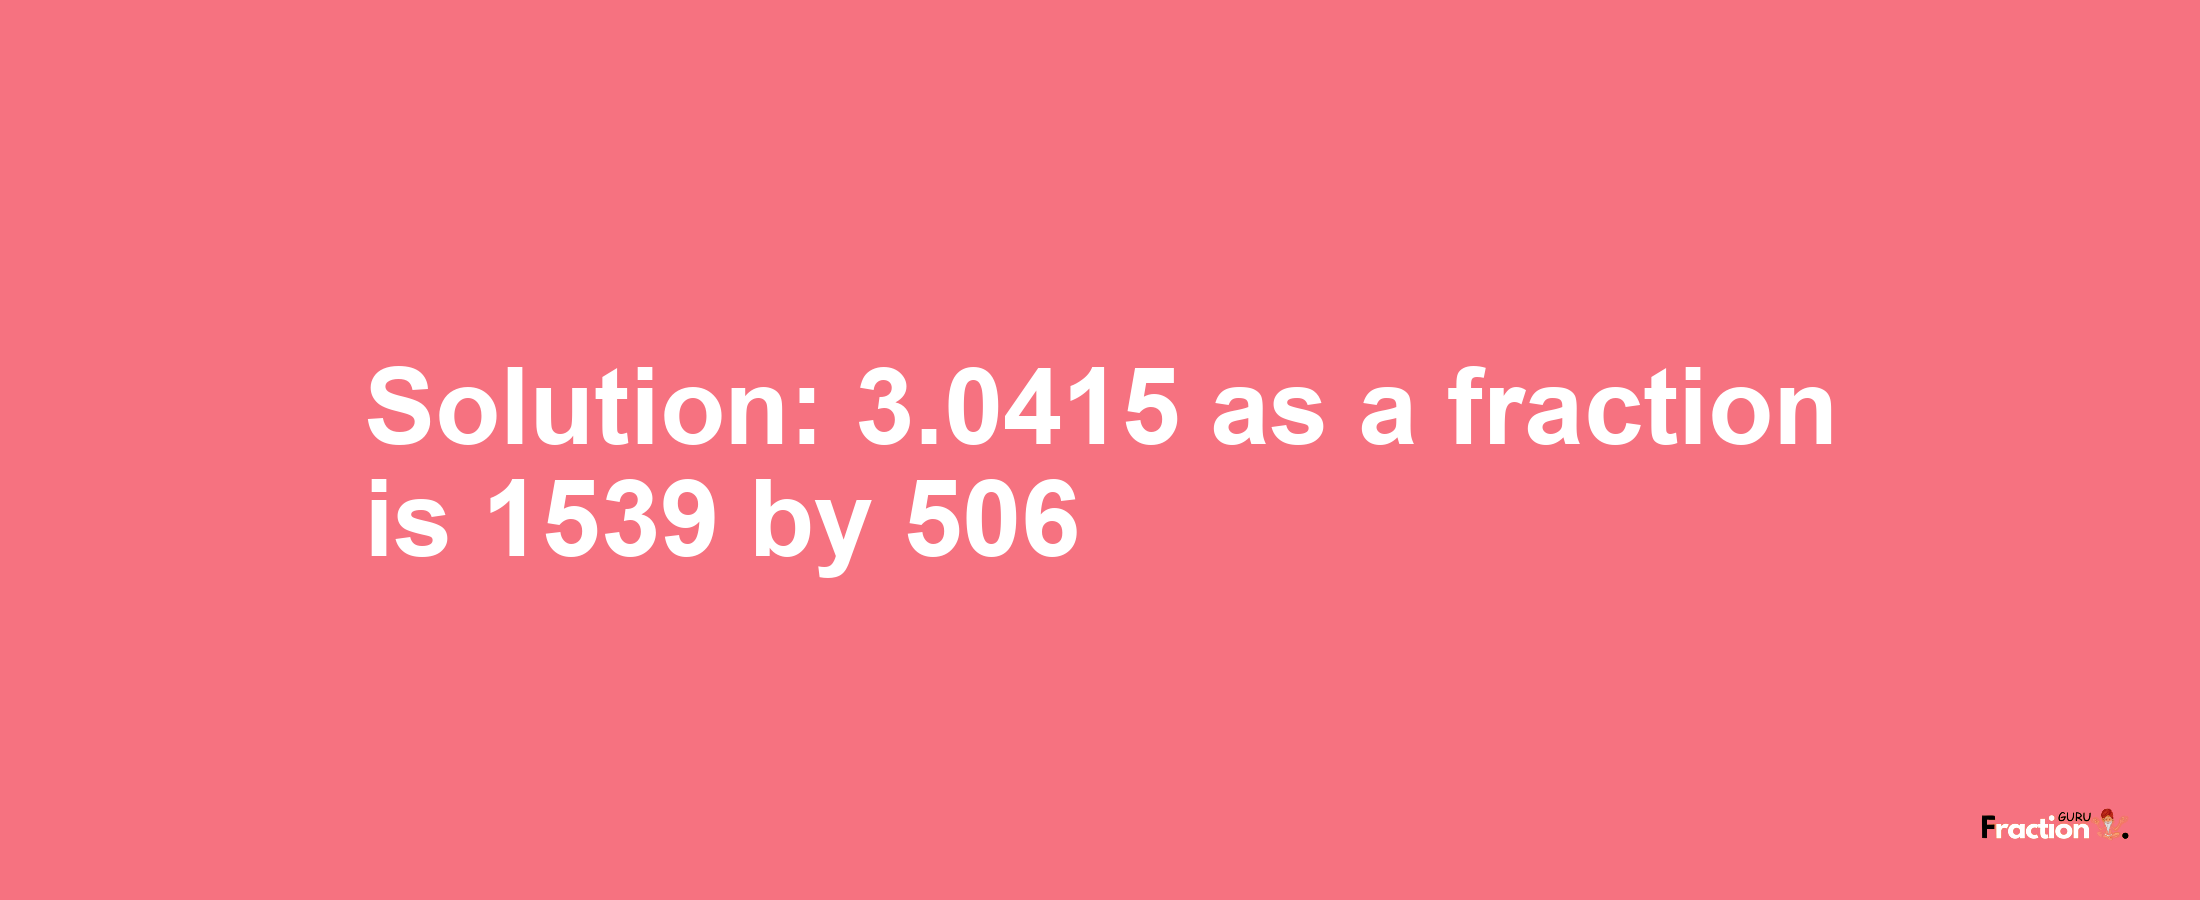 Solution:3.0415 as a fraction is 1539/506